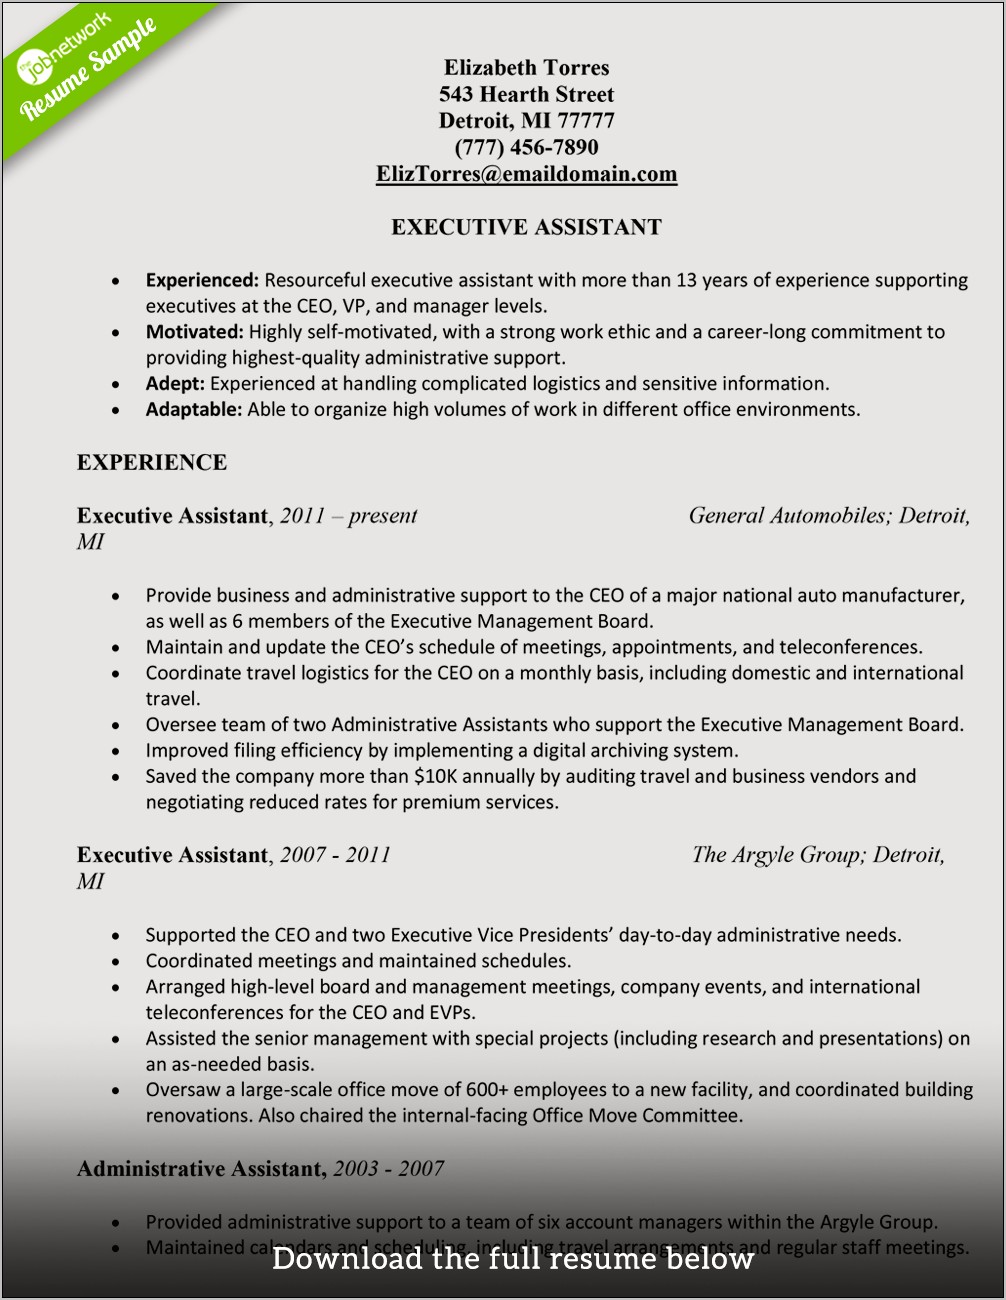 Samples Of Functional Resumes For Administrative Assistant